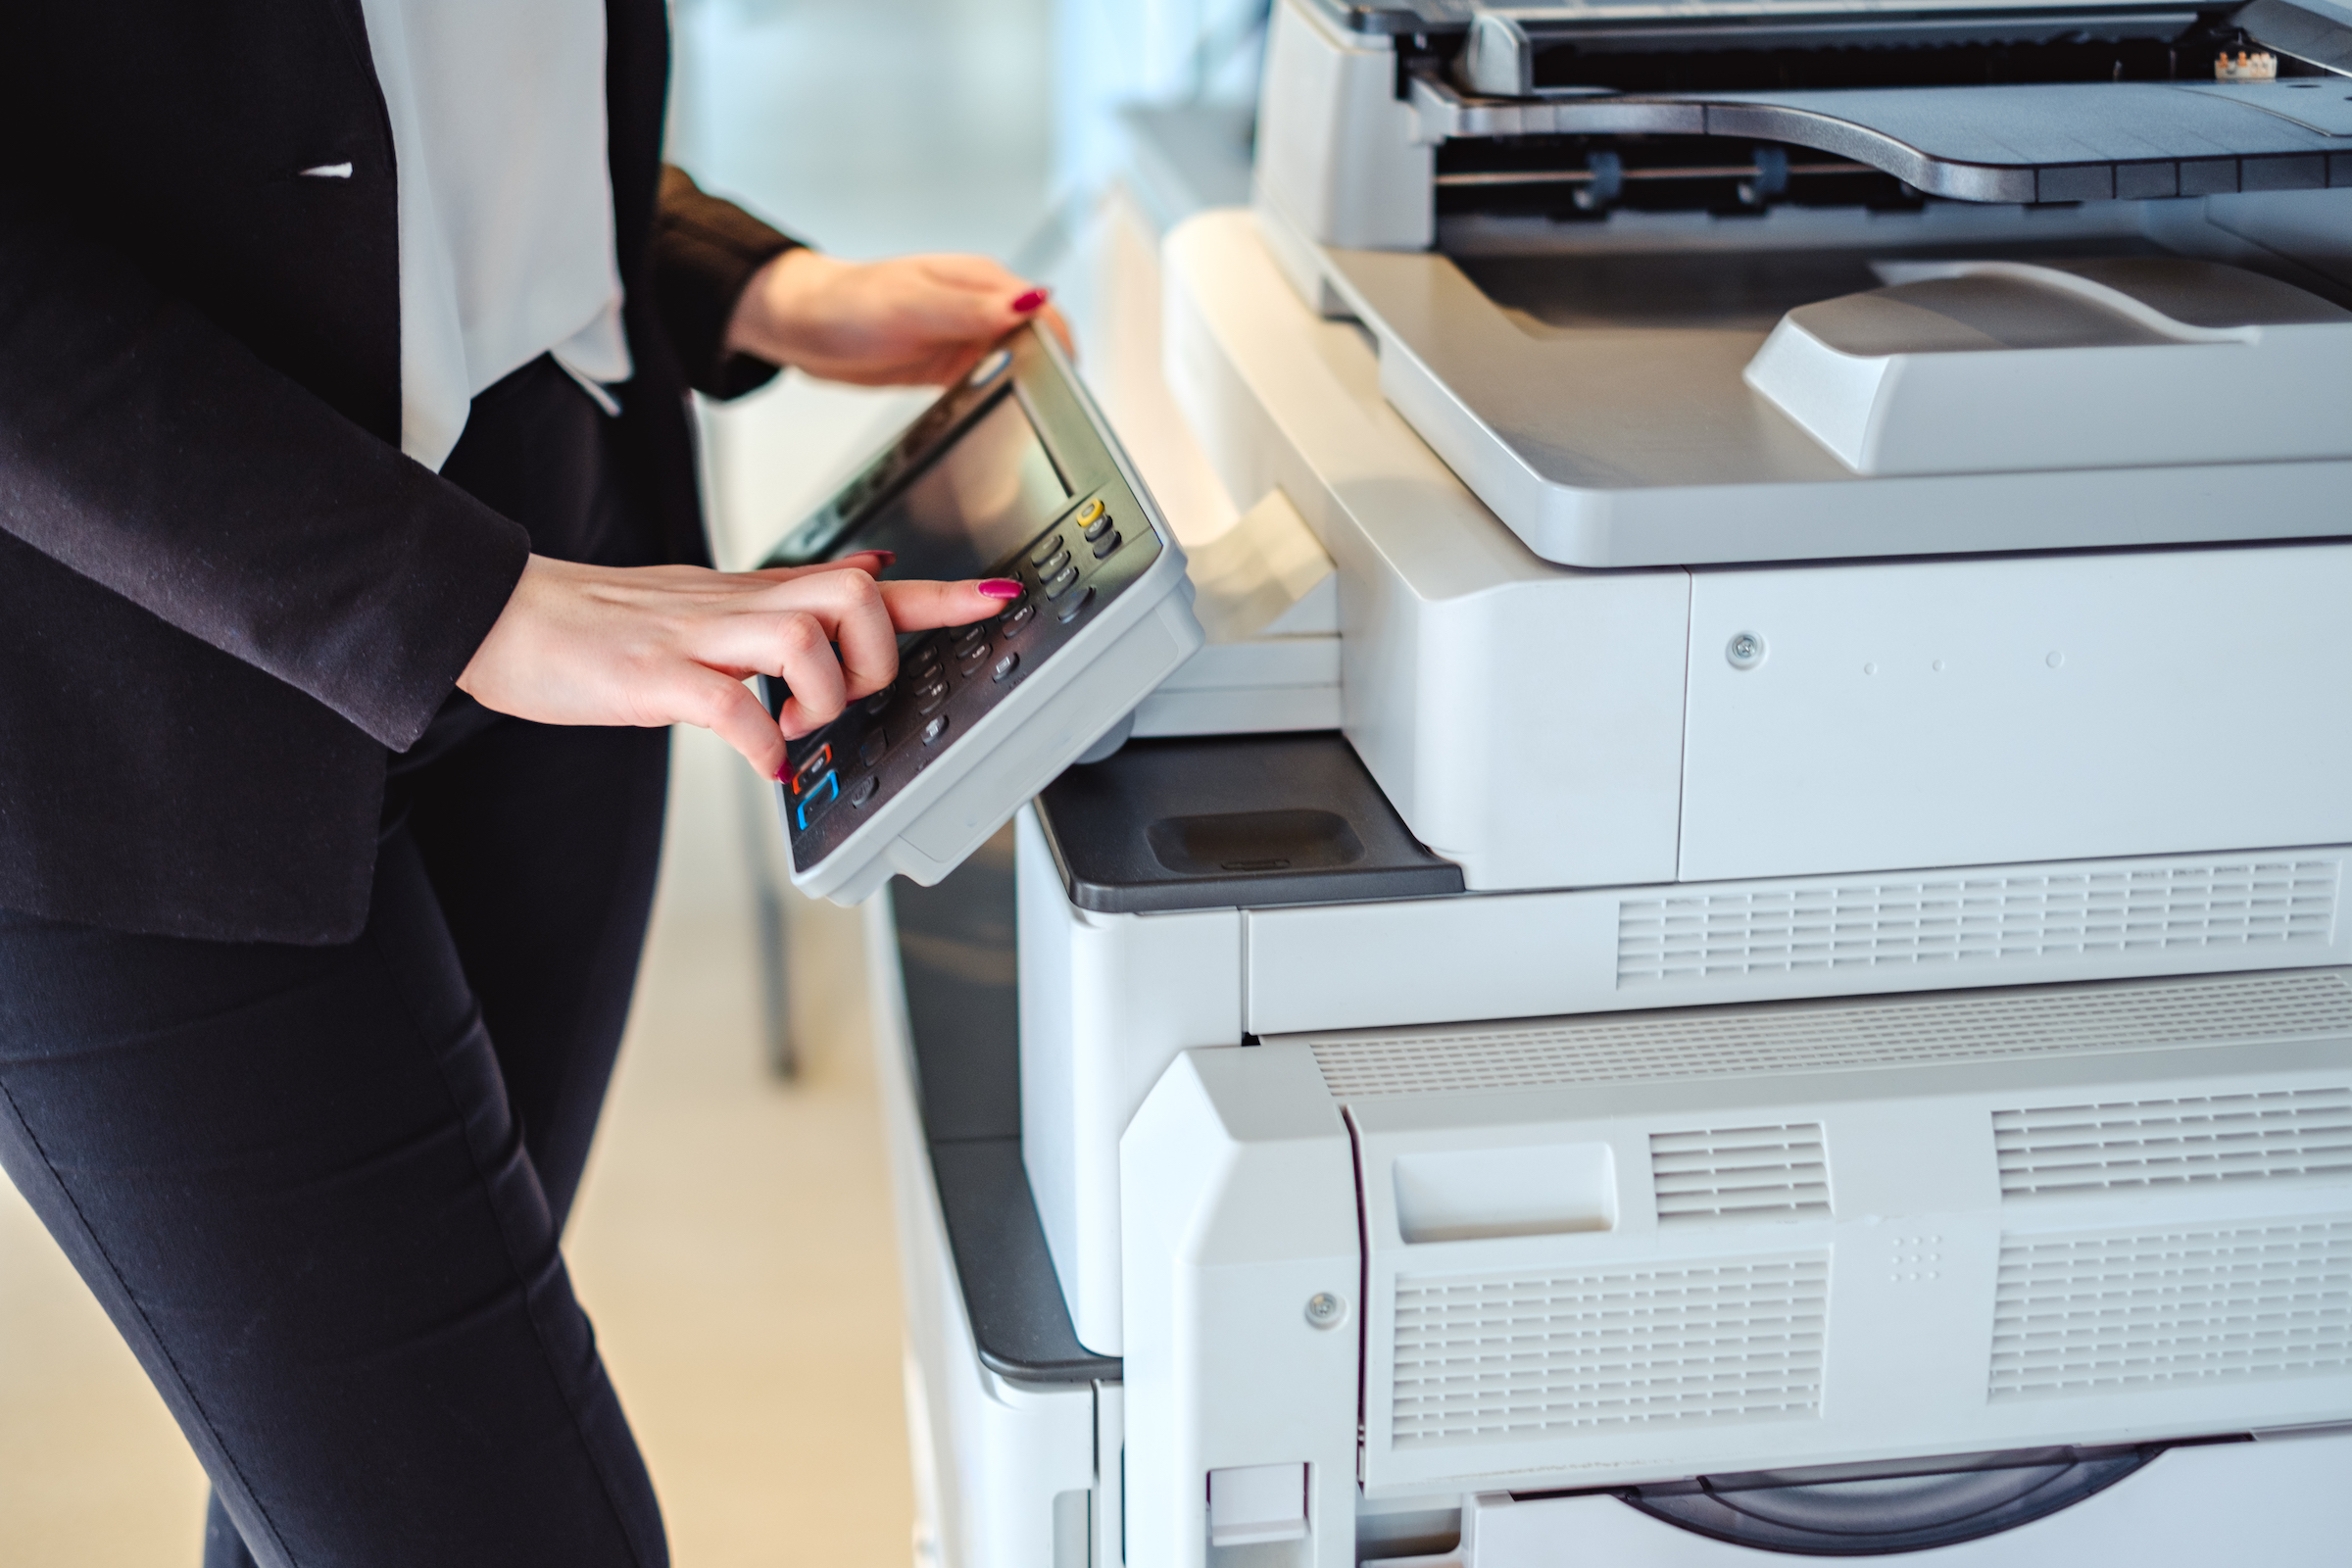 Using the easy to use copier control panel